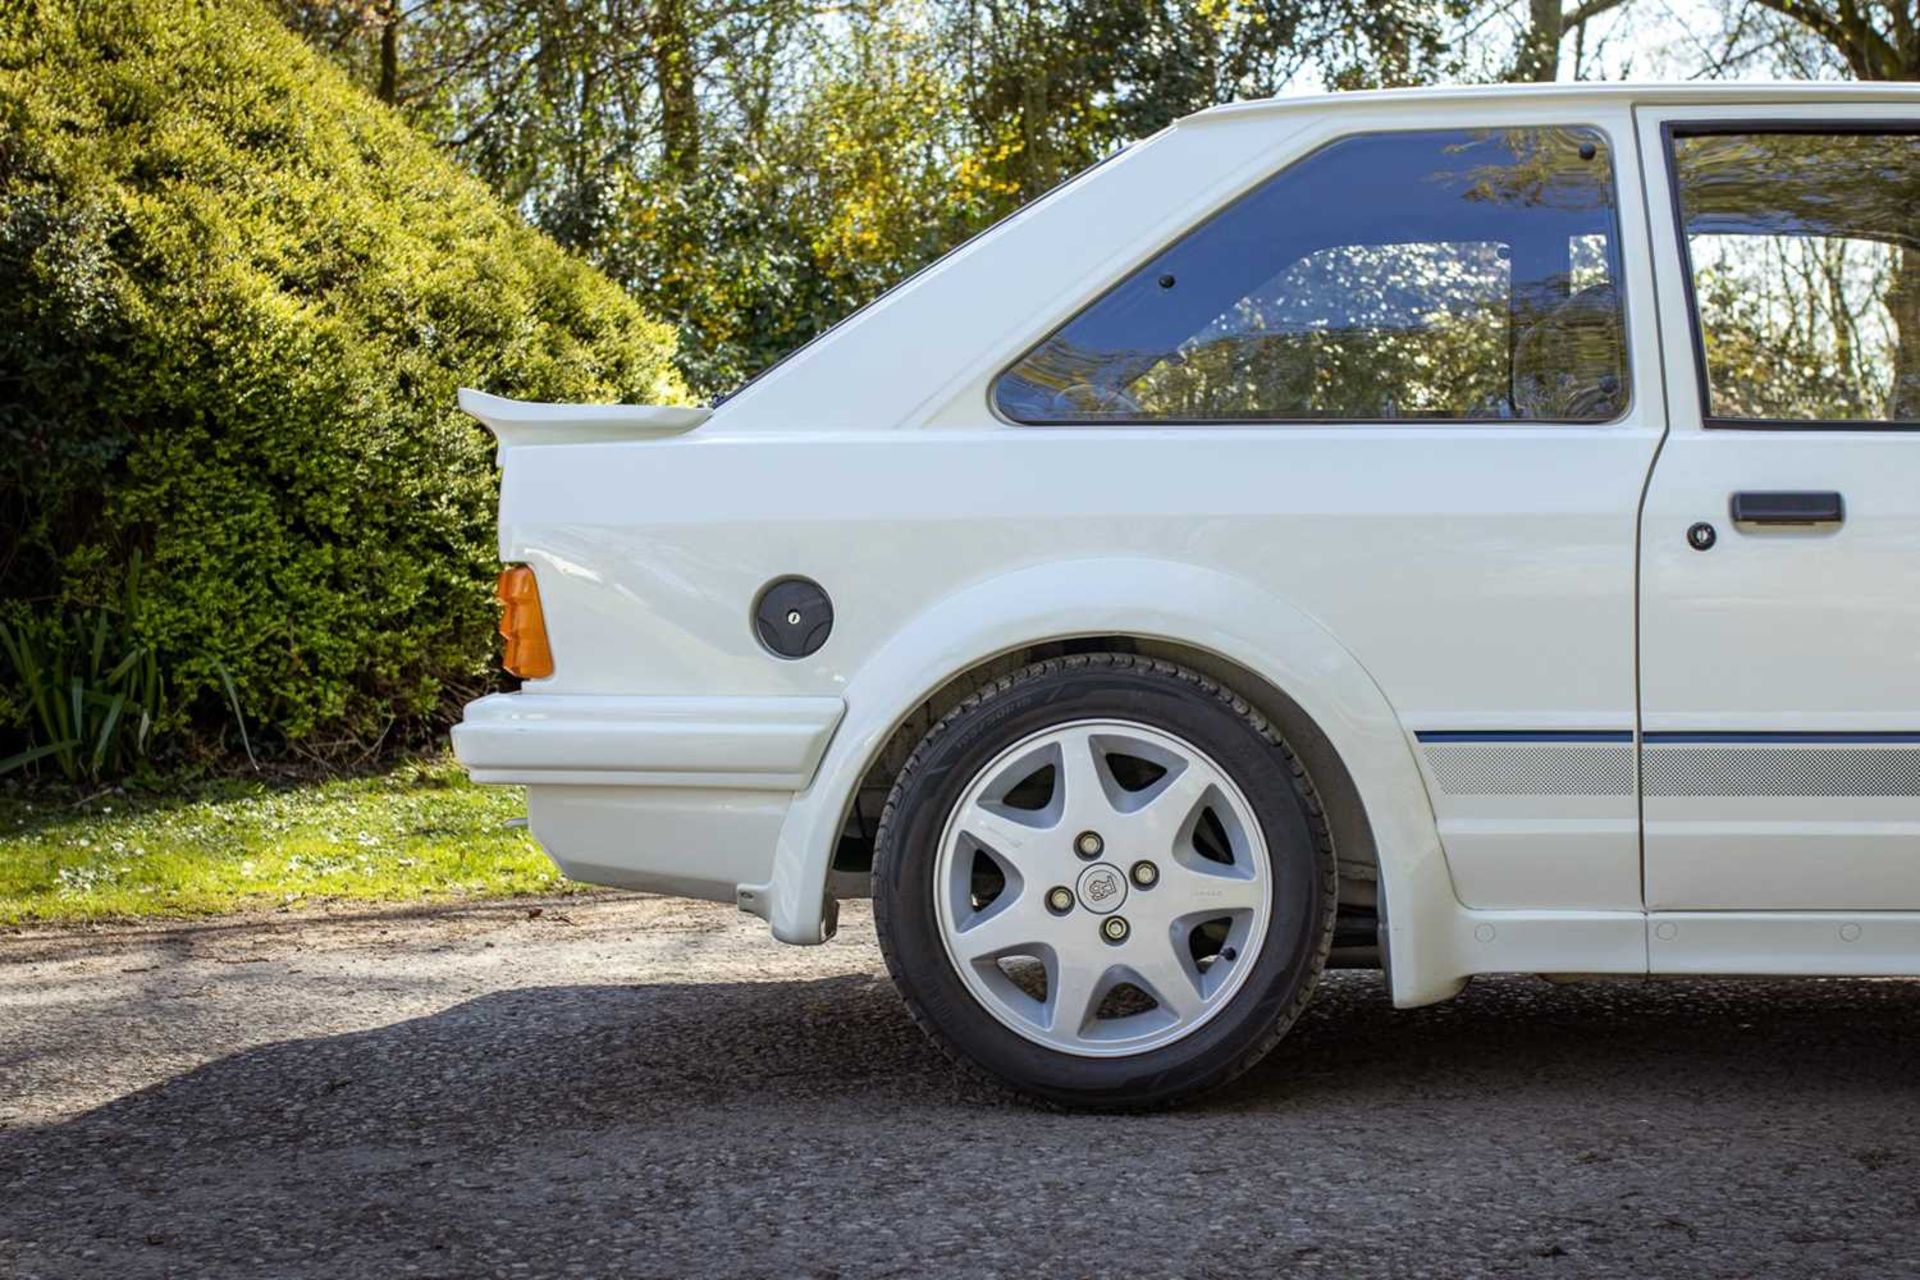 1985 Ford Escort RS Turbo S1 Subject to a full restoration  - Image 36 of 76